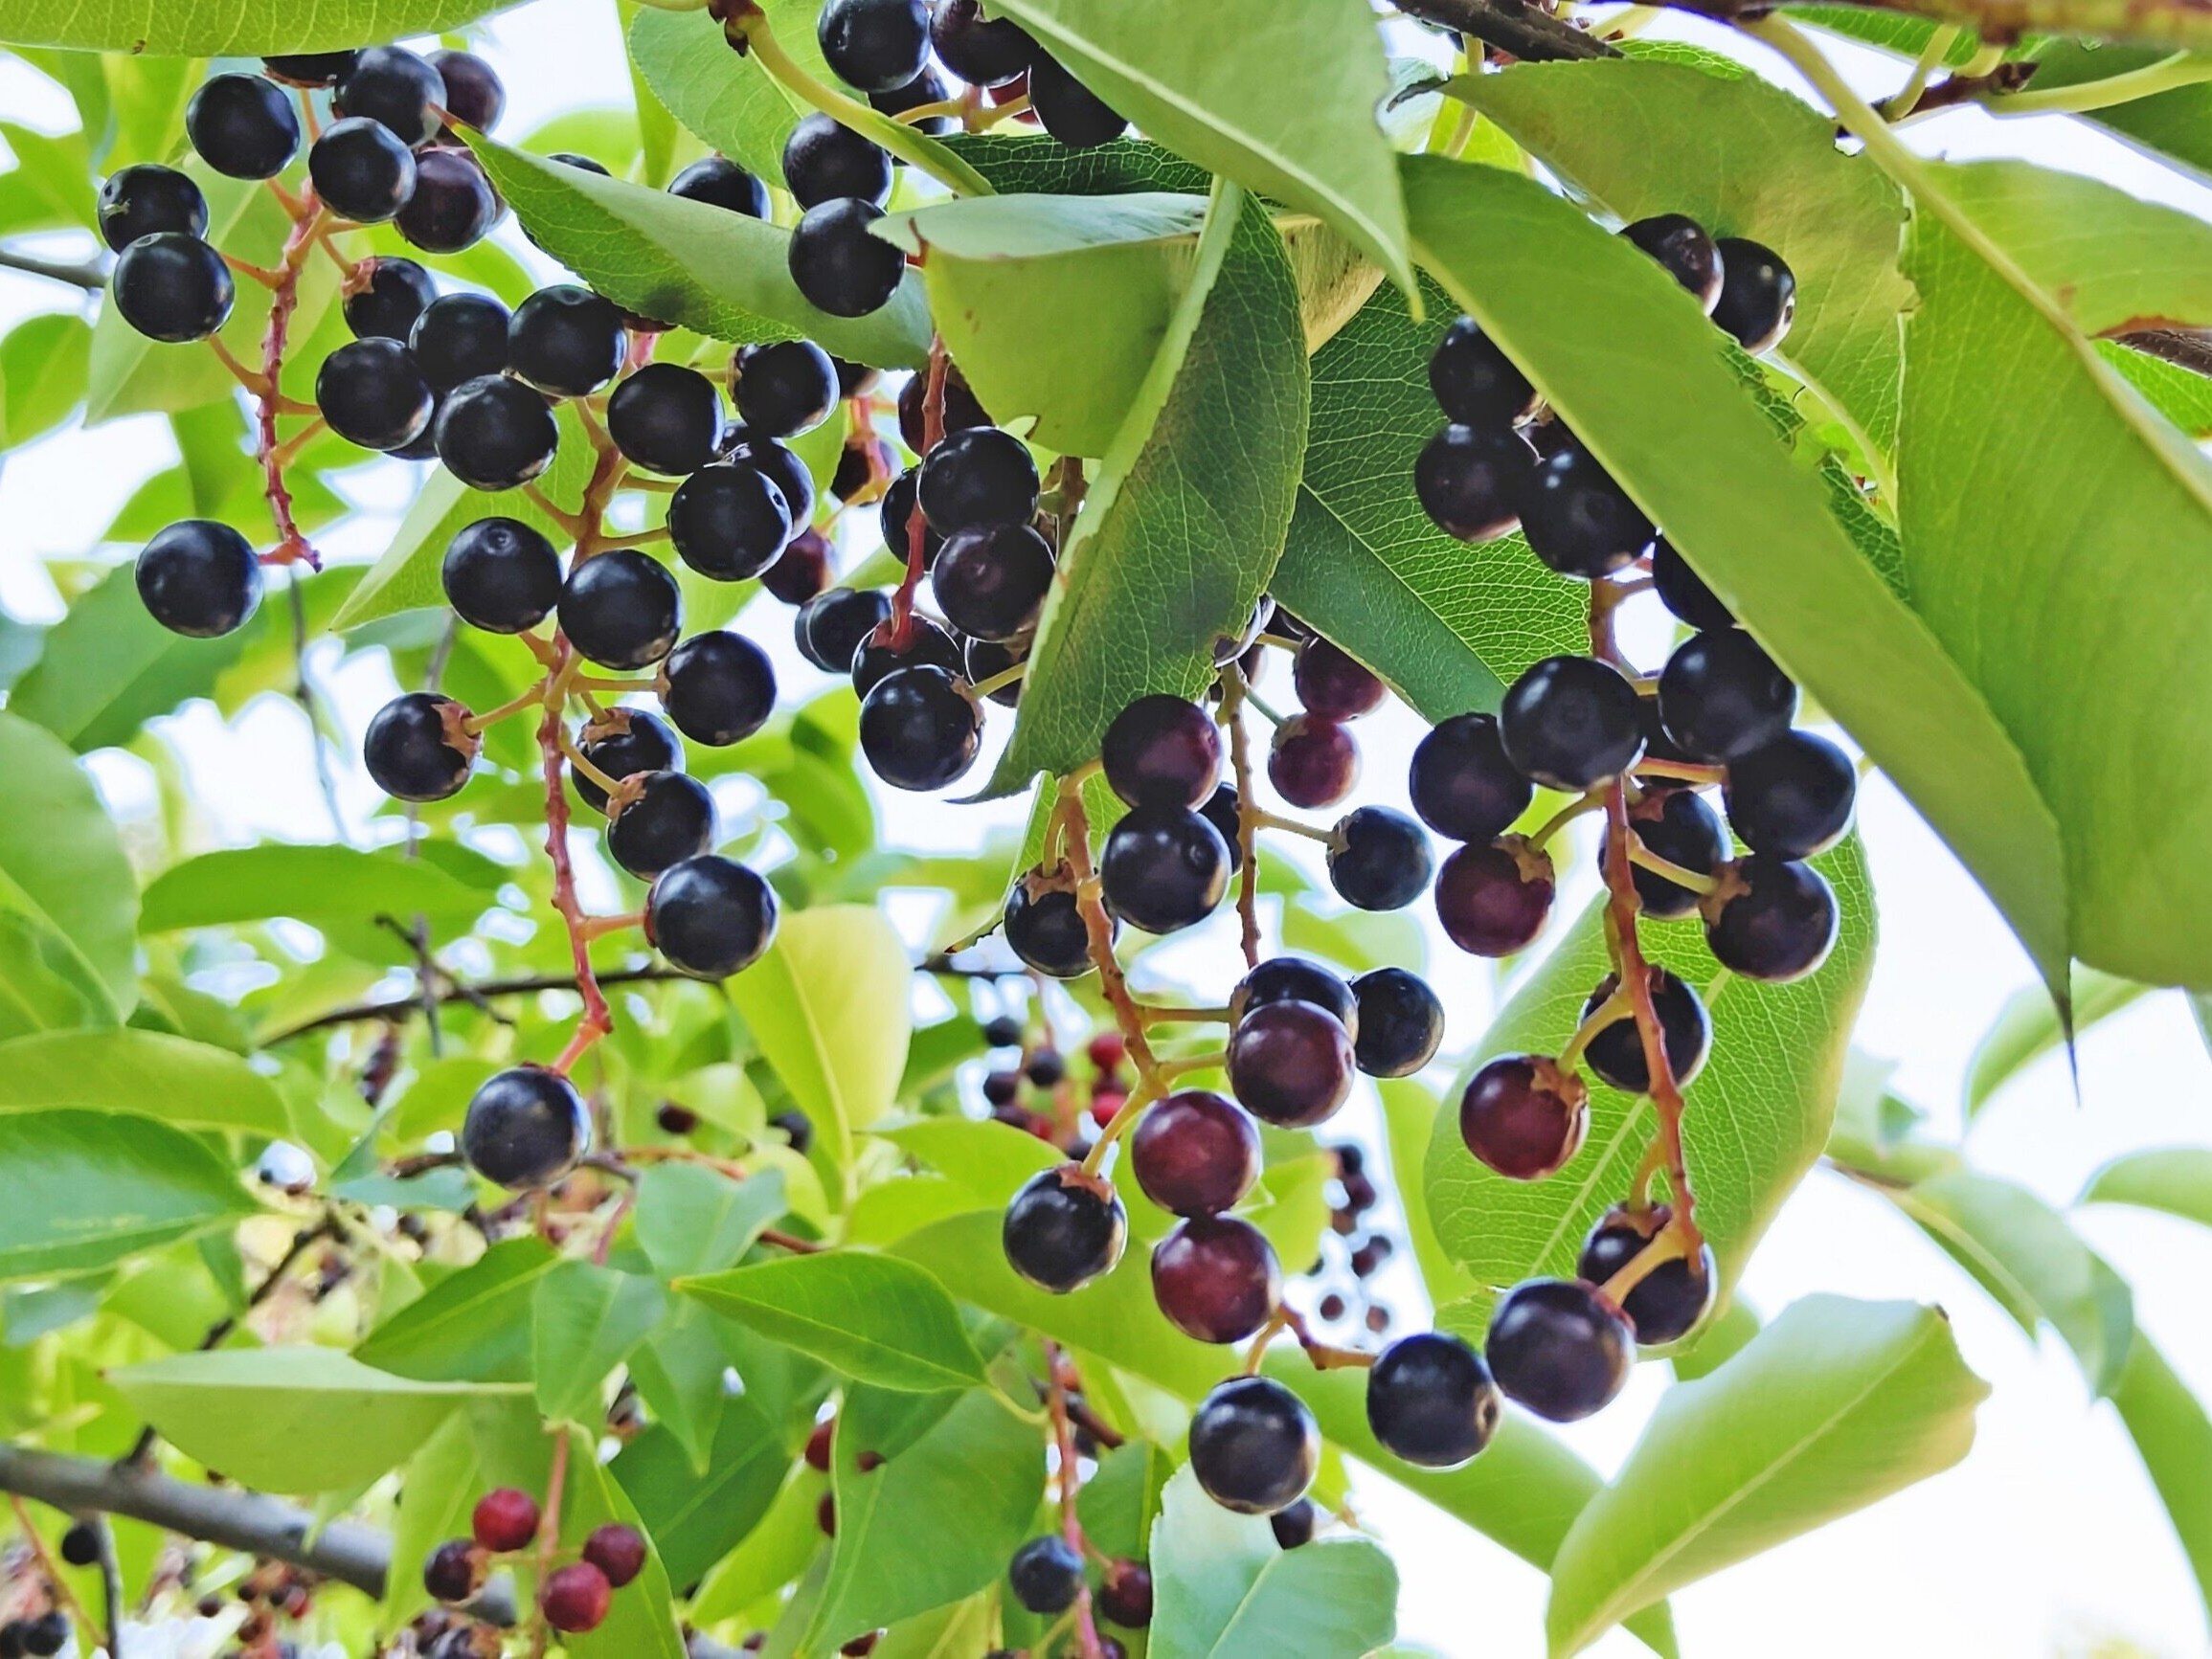 Bird cherry will strengthen immunity and help with infections.  How to make bird cherry syrup?